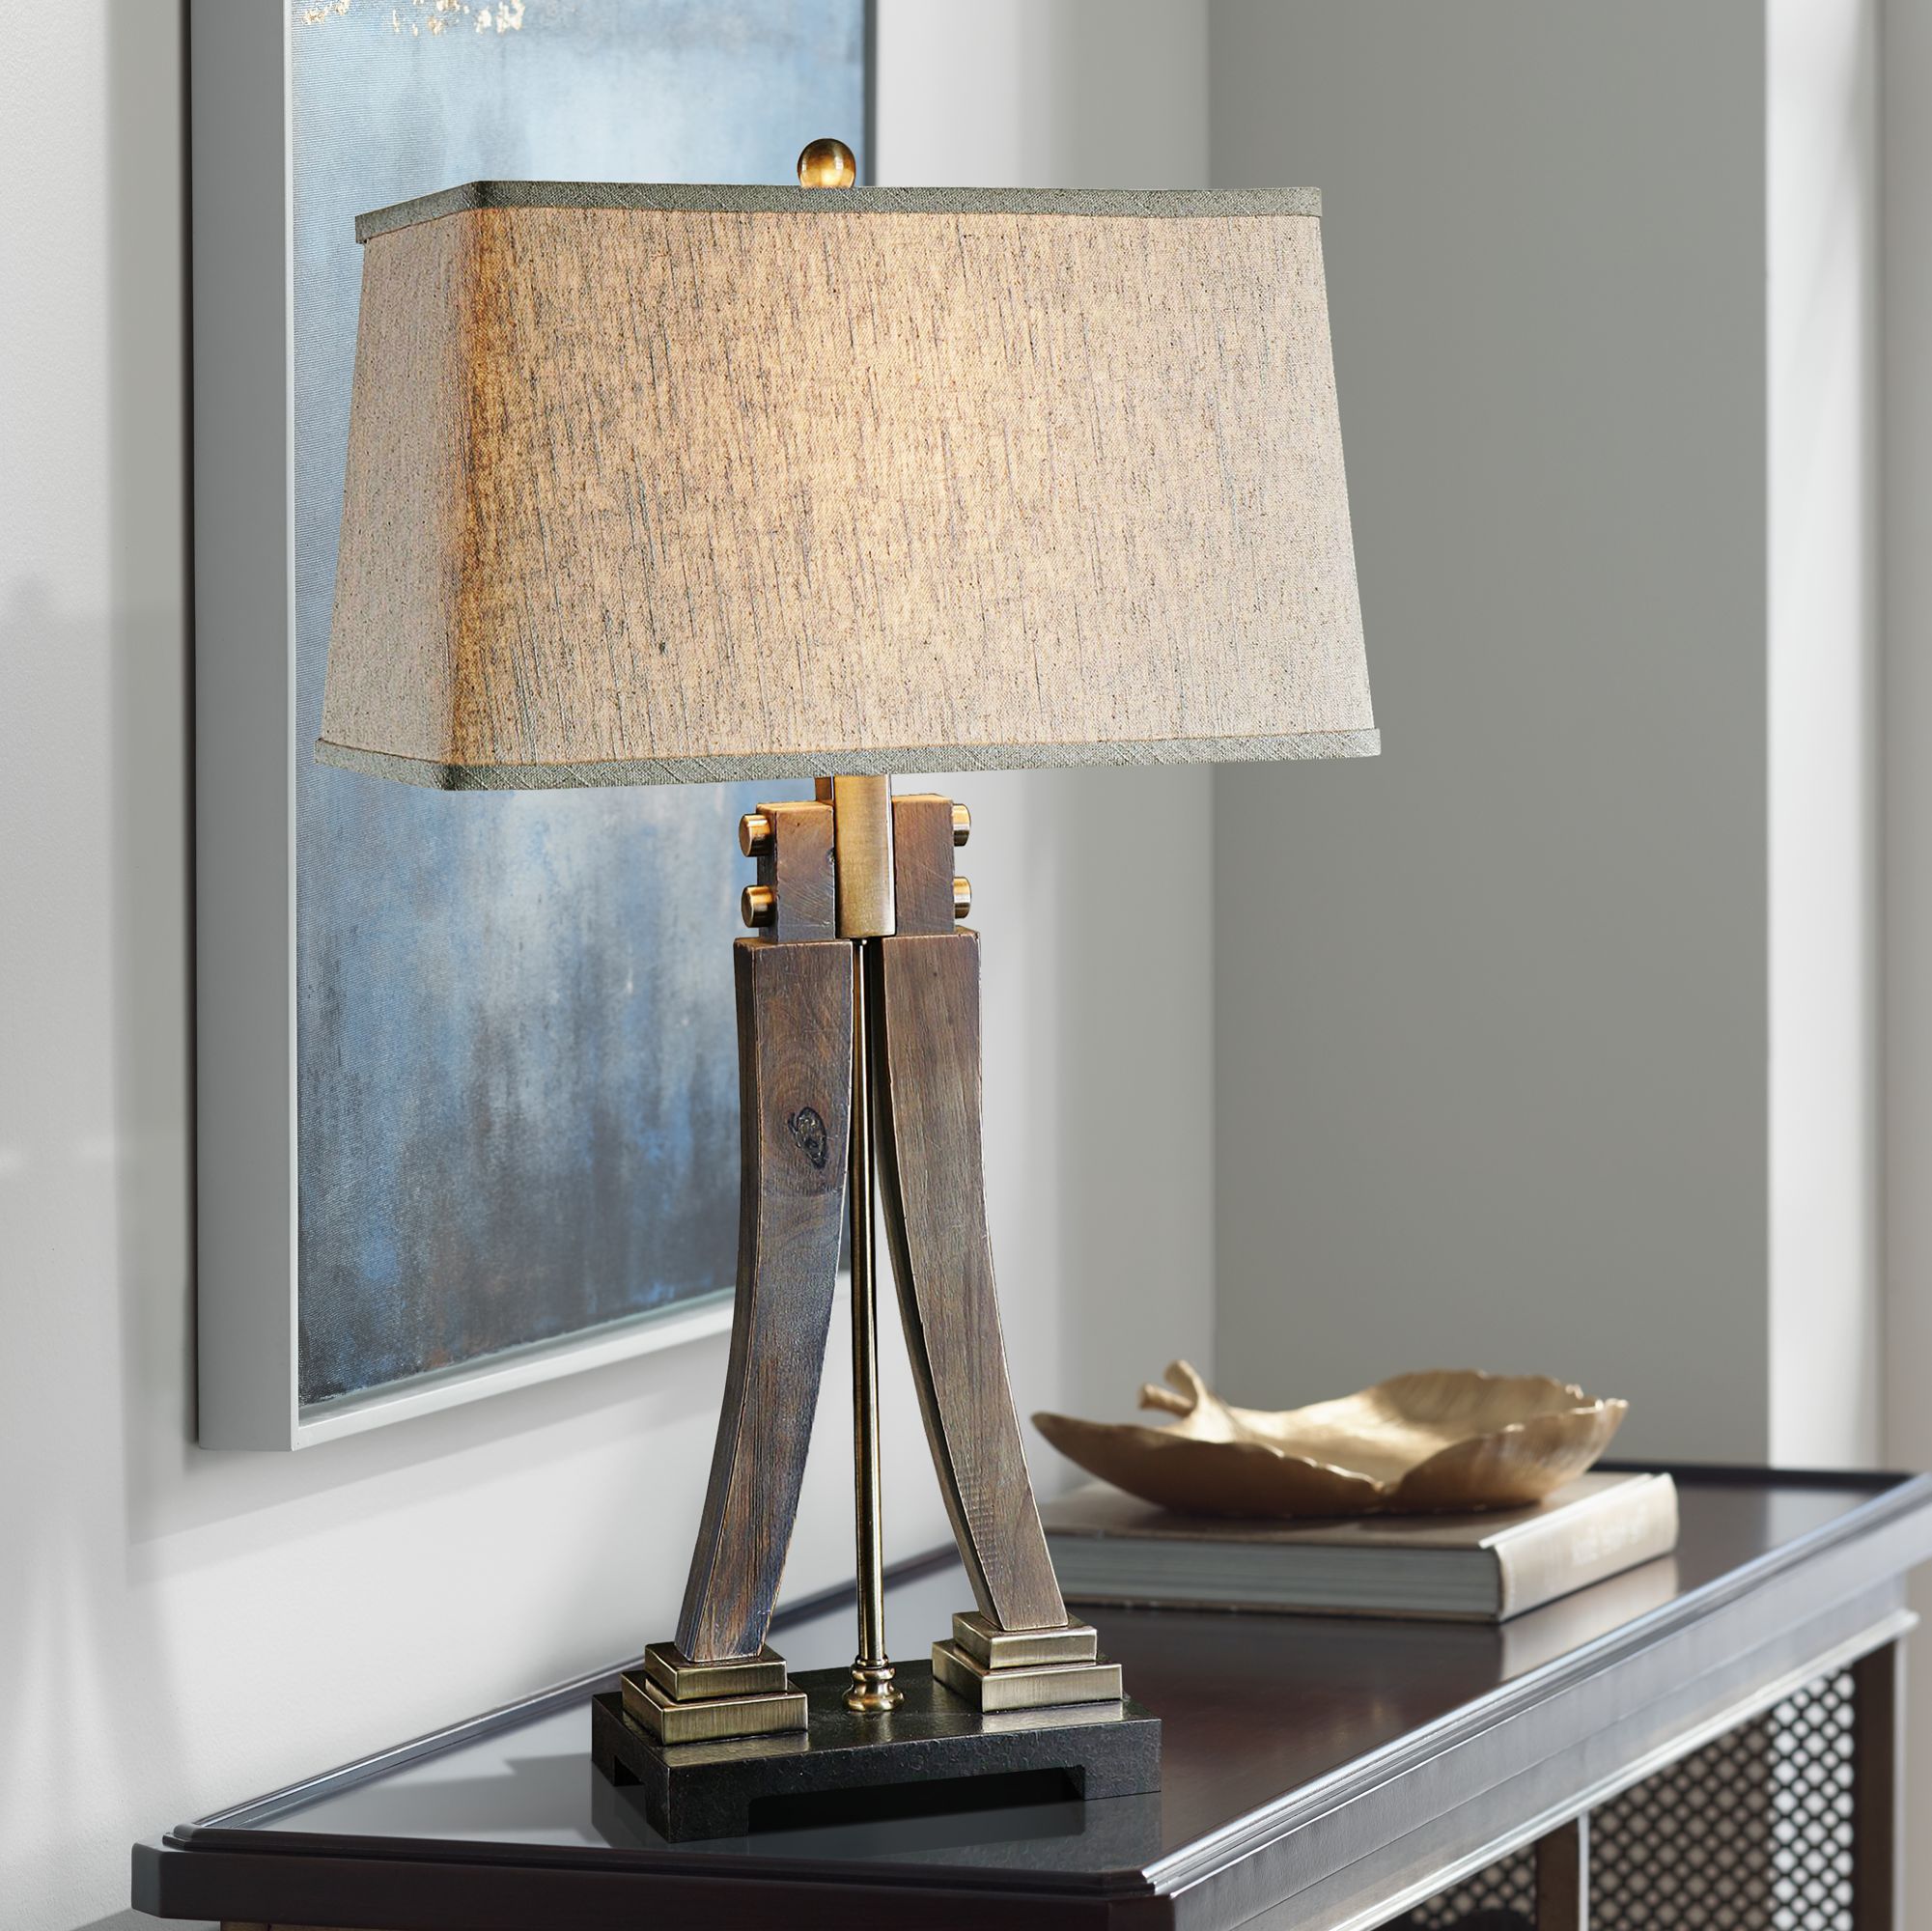 pewter table lamp